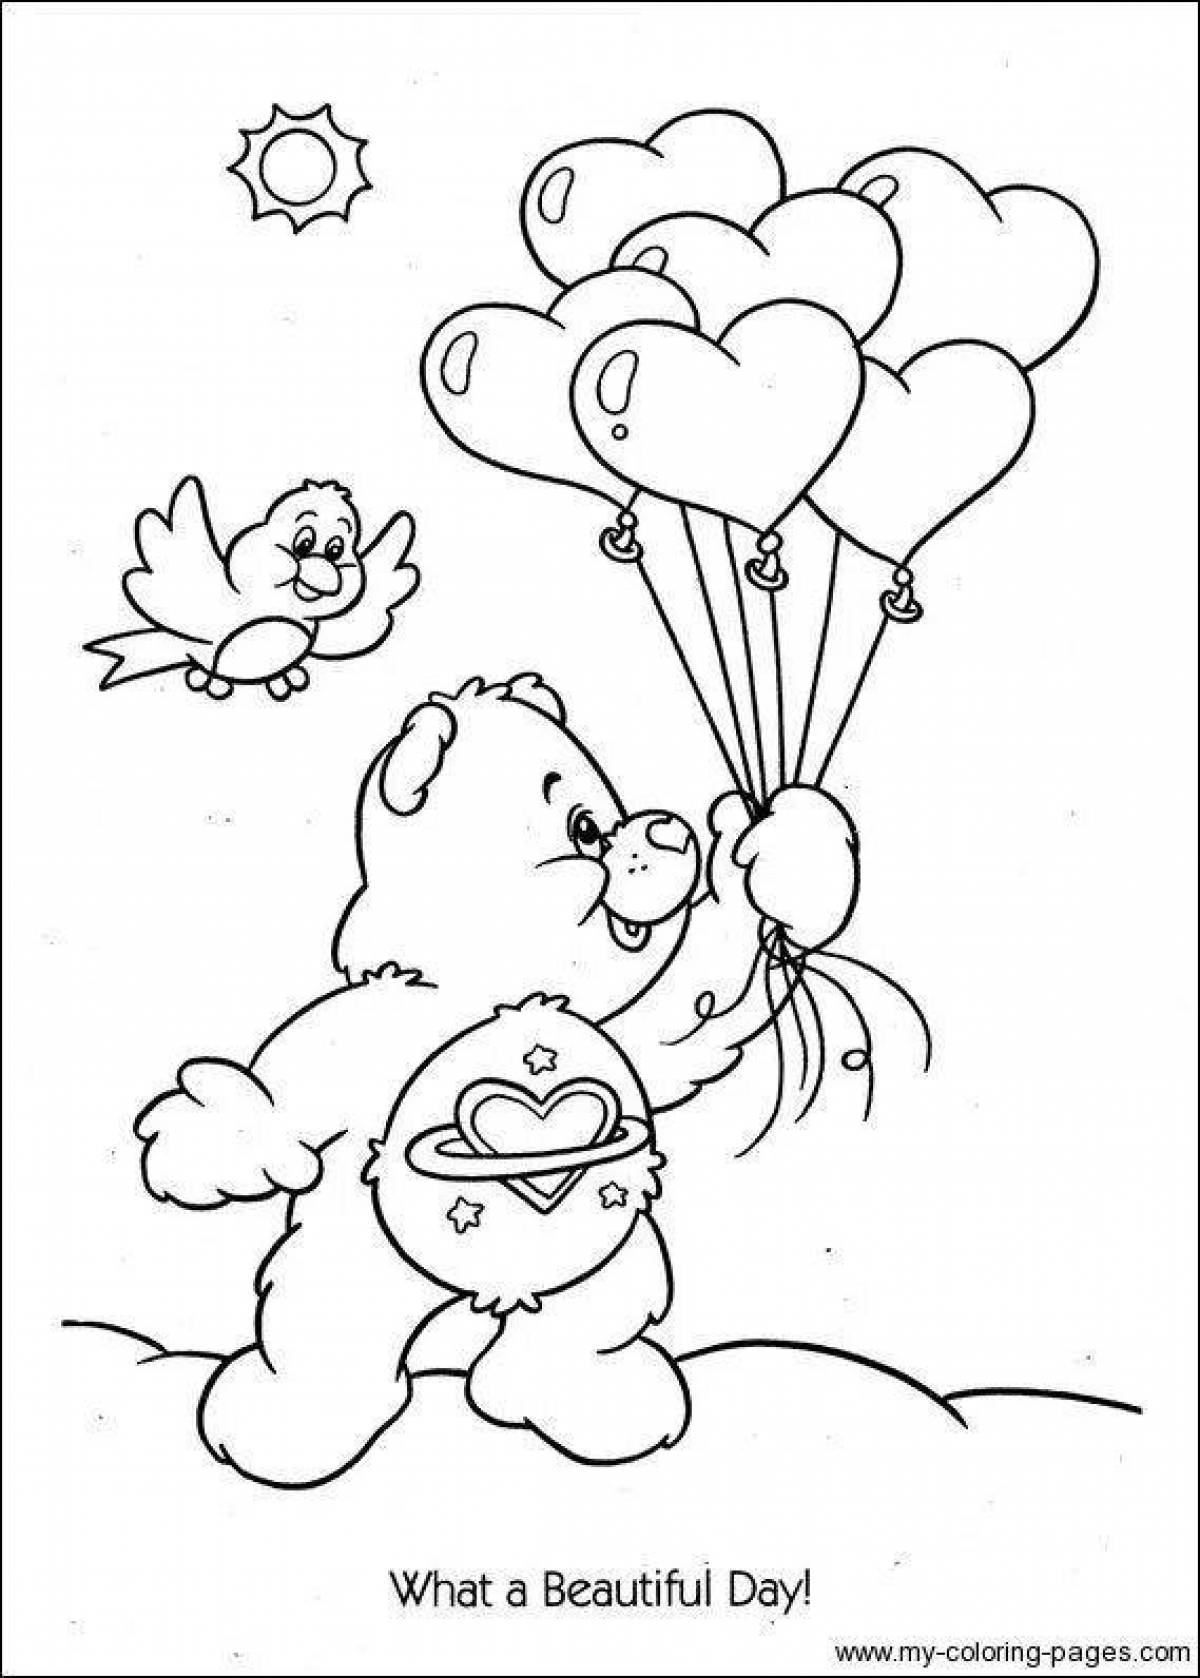 Funny bear with balloons